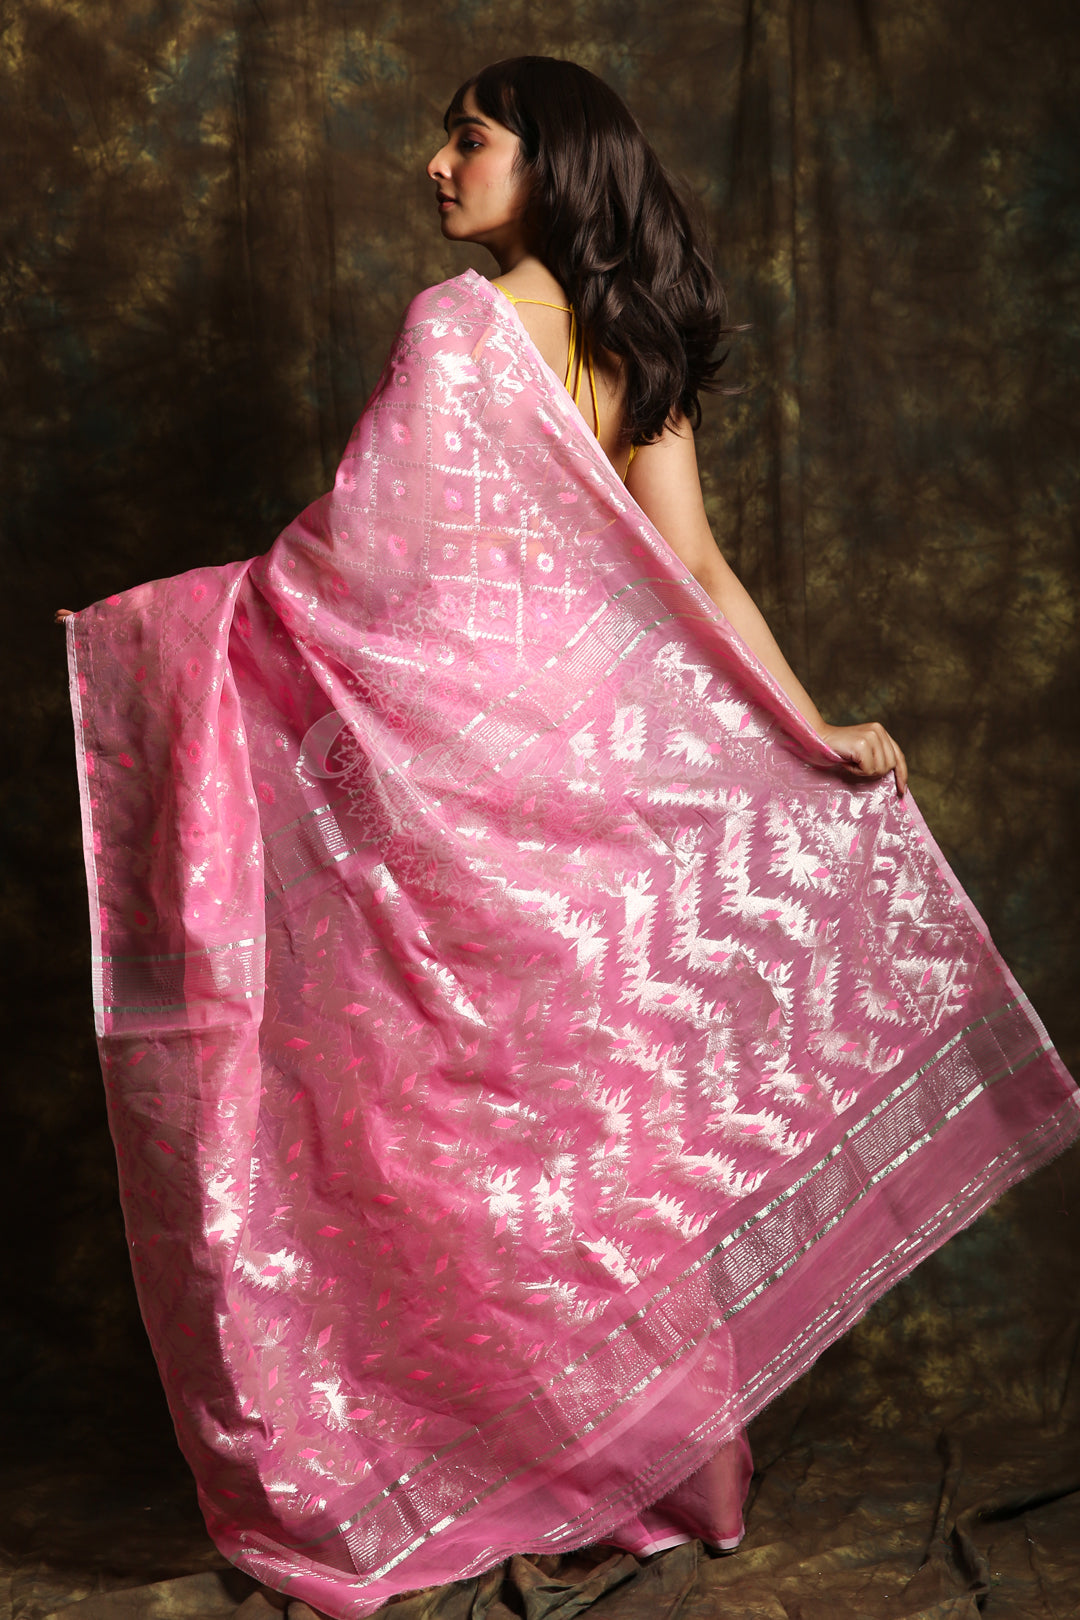 This Baby Pink Jamdani Saree By Charukriti Is Crafted In Cotton And Features Silver Zari Minakari Weaving Details All Over - charukriti.co.in